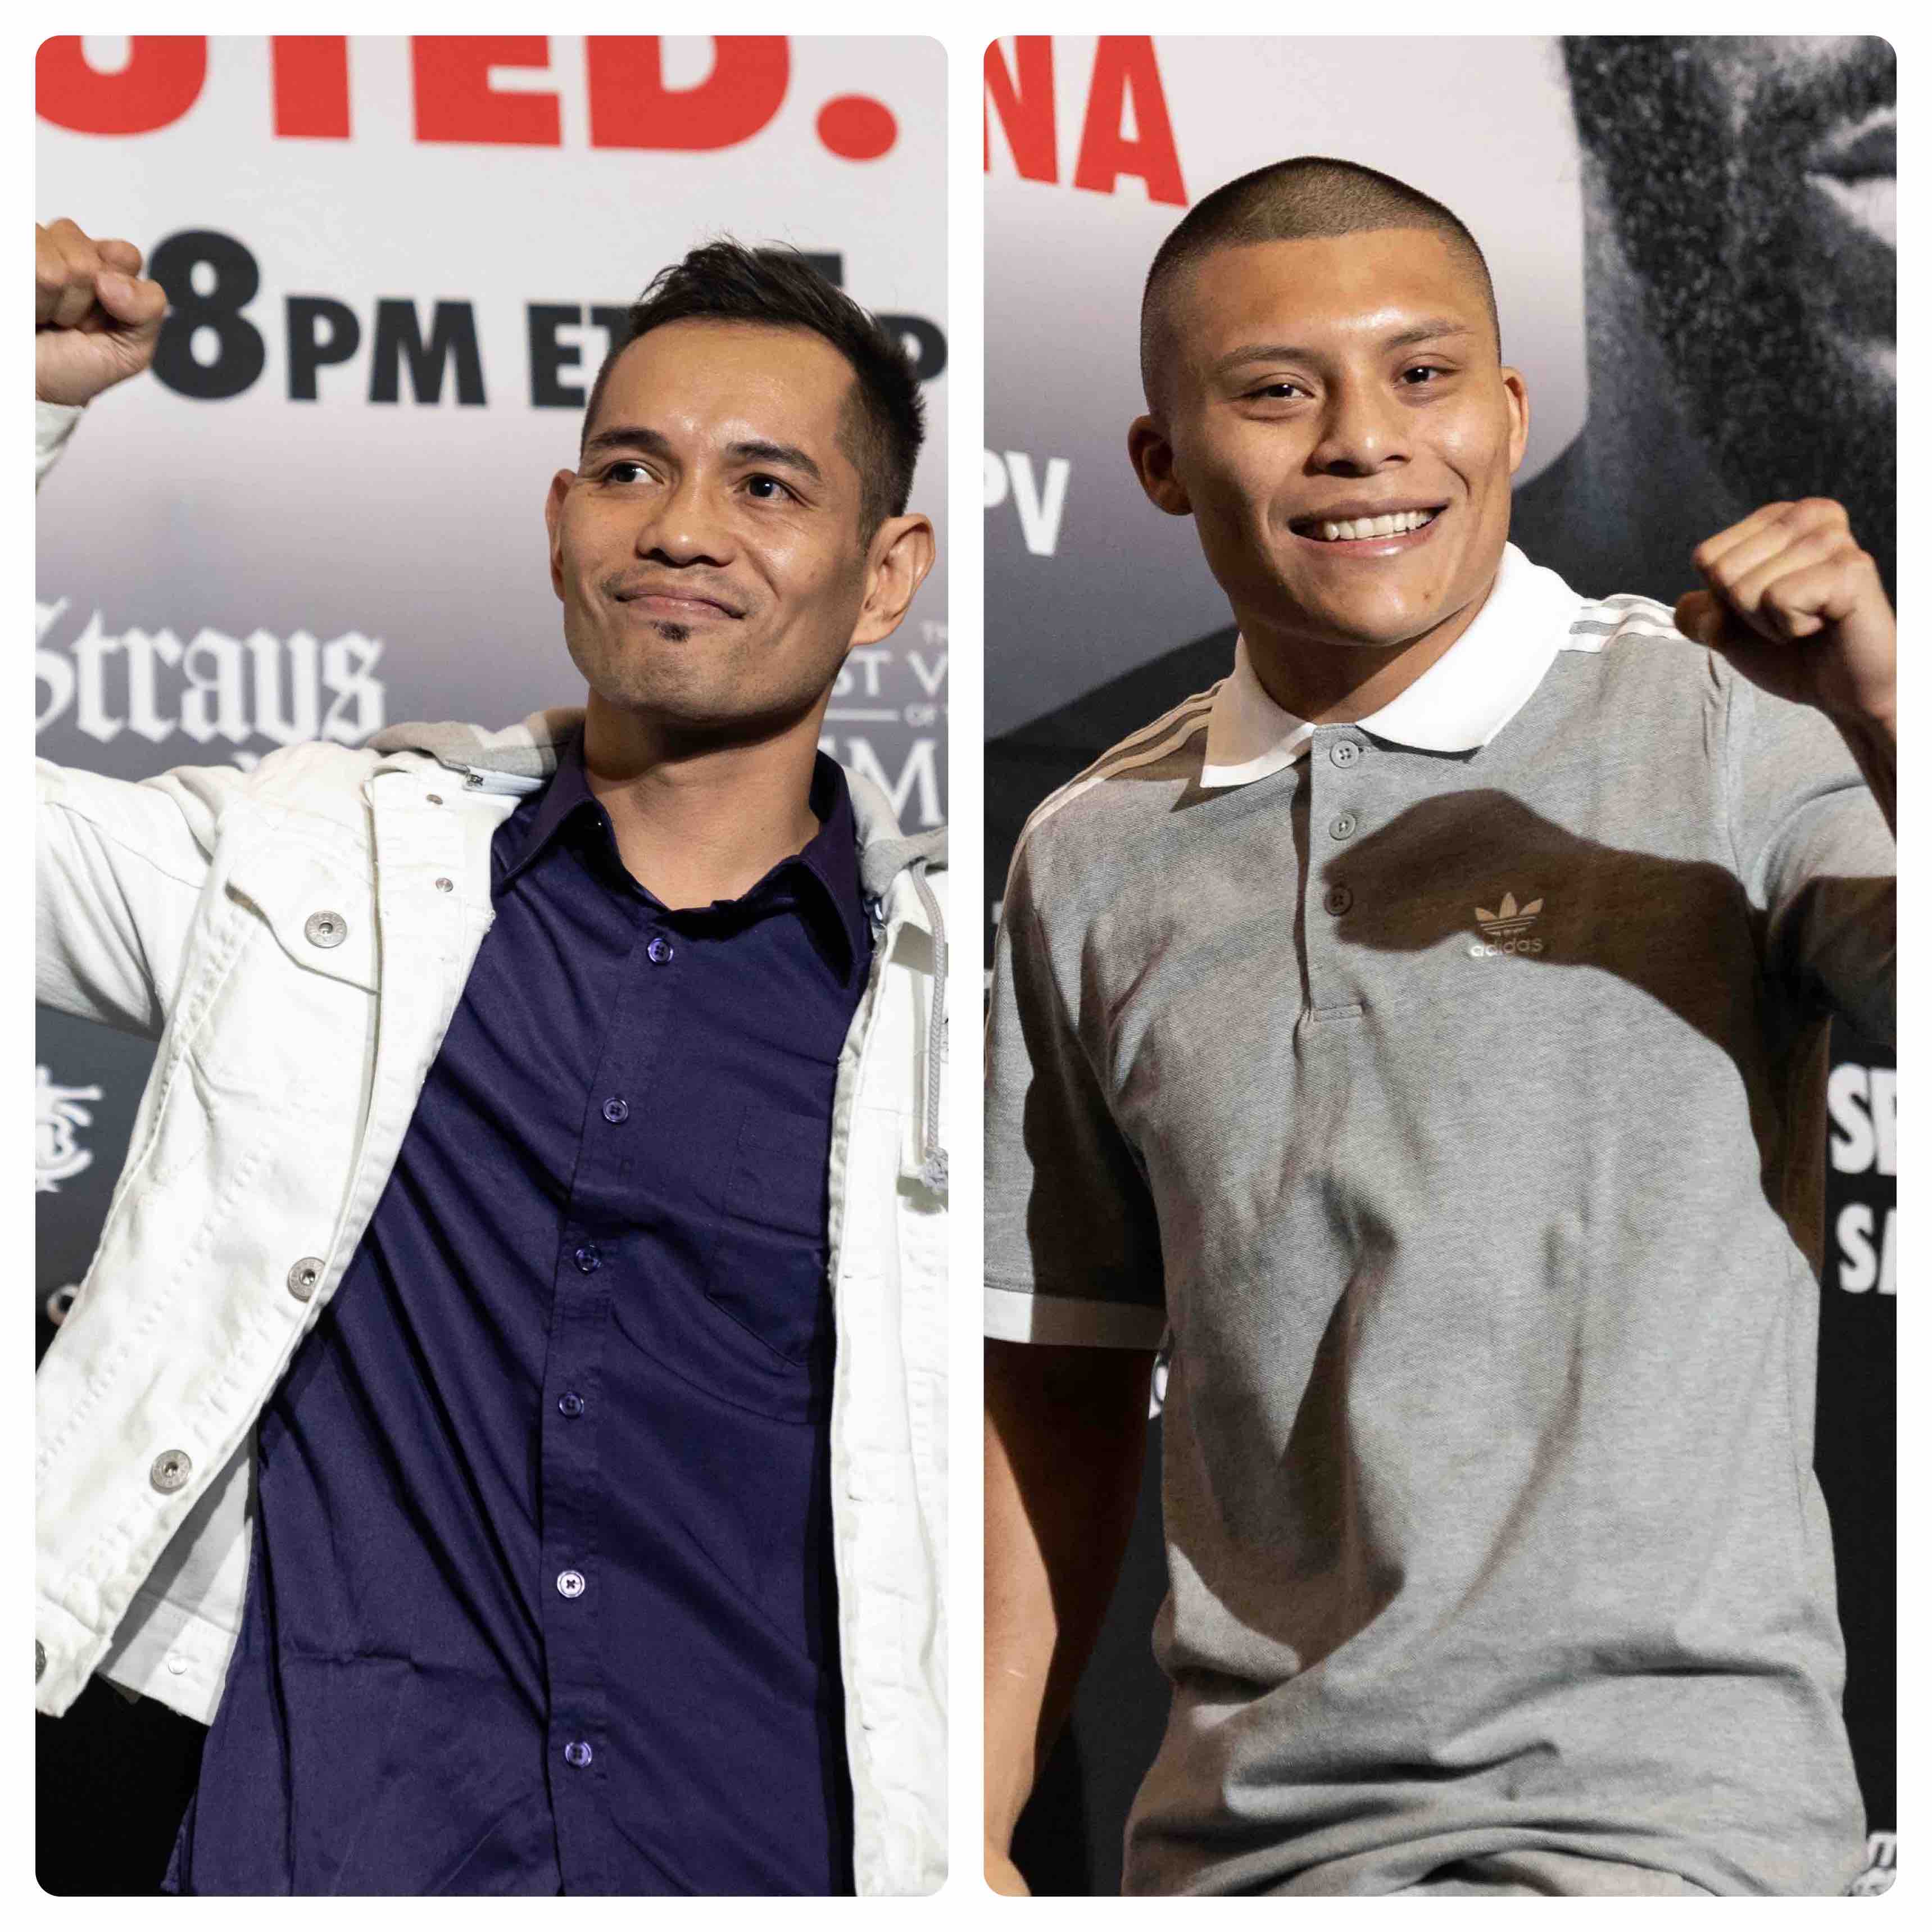 Donaire eyes making further history, Cruz has eyes for Tank rematch